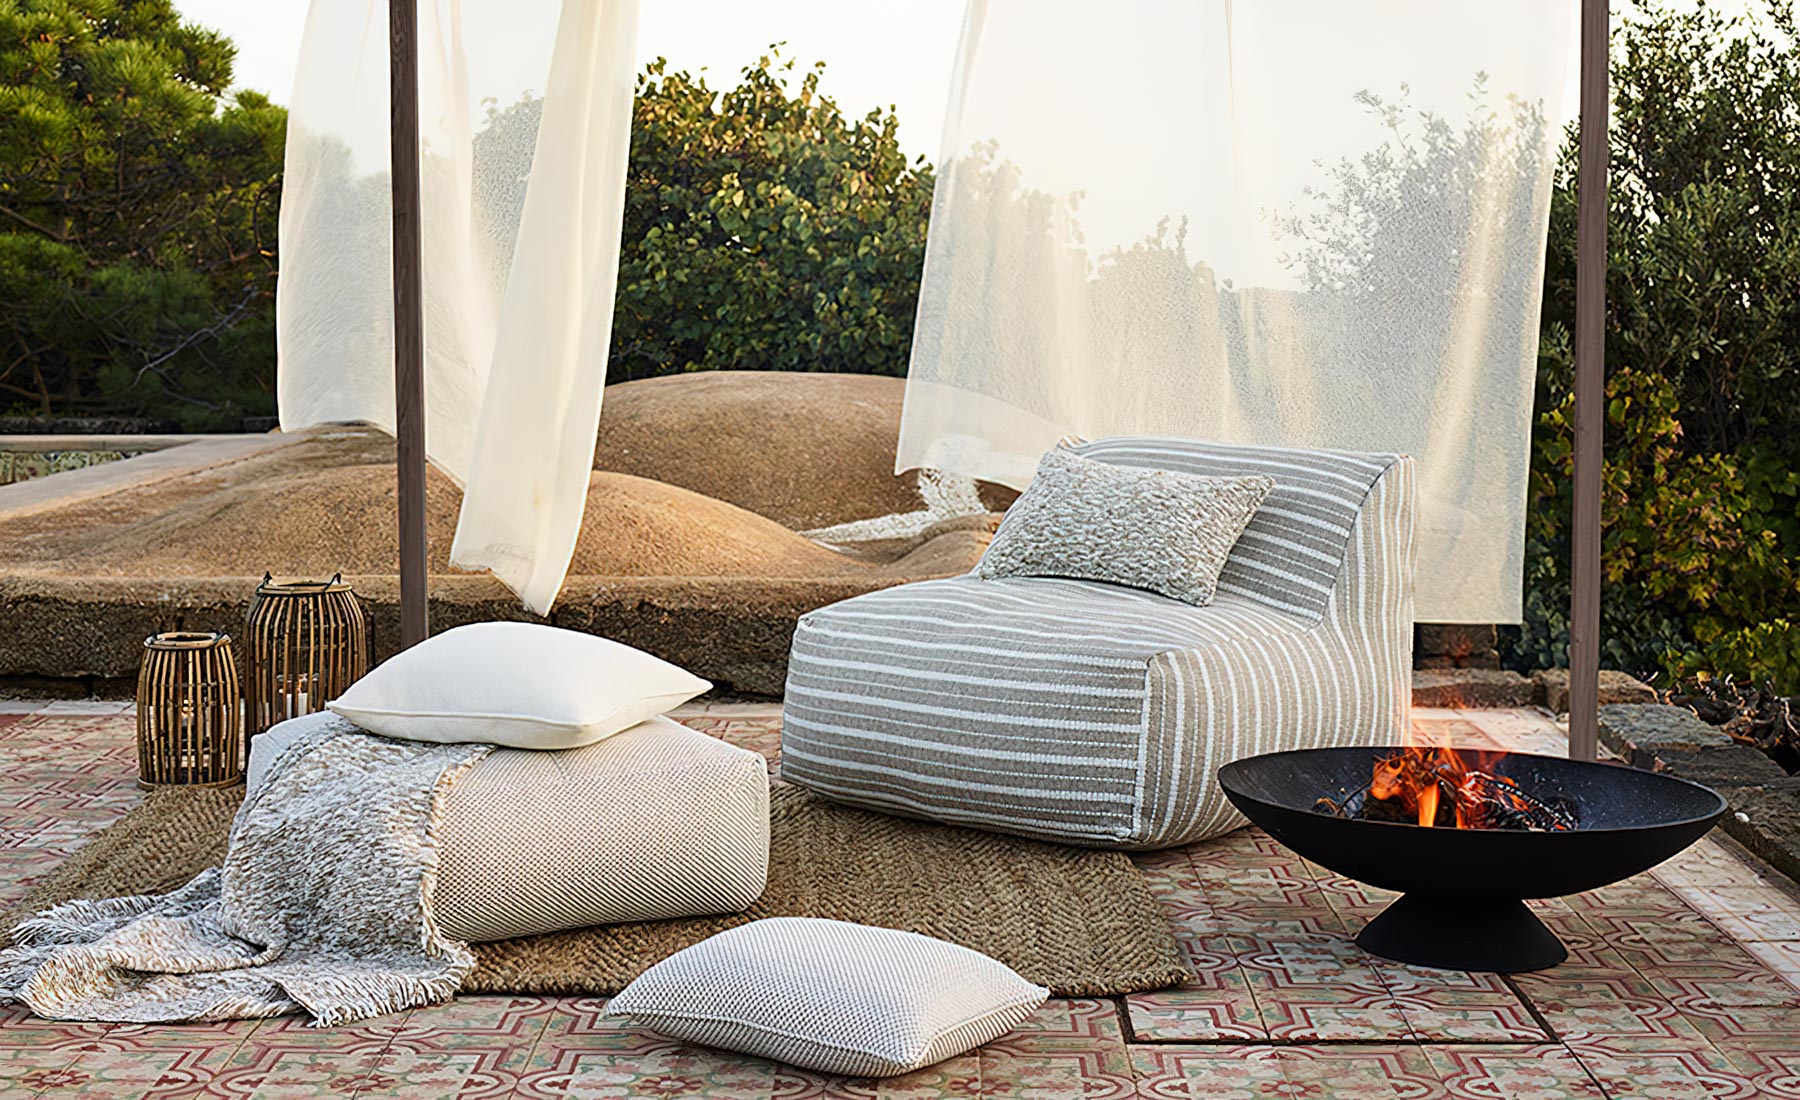 Rough edges and outdoor glamour from Zinc Textiles, perfect for Sydney summers.